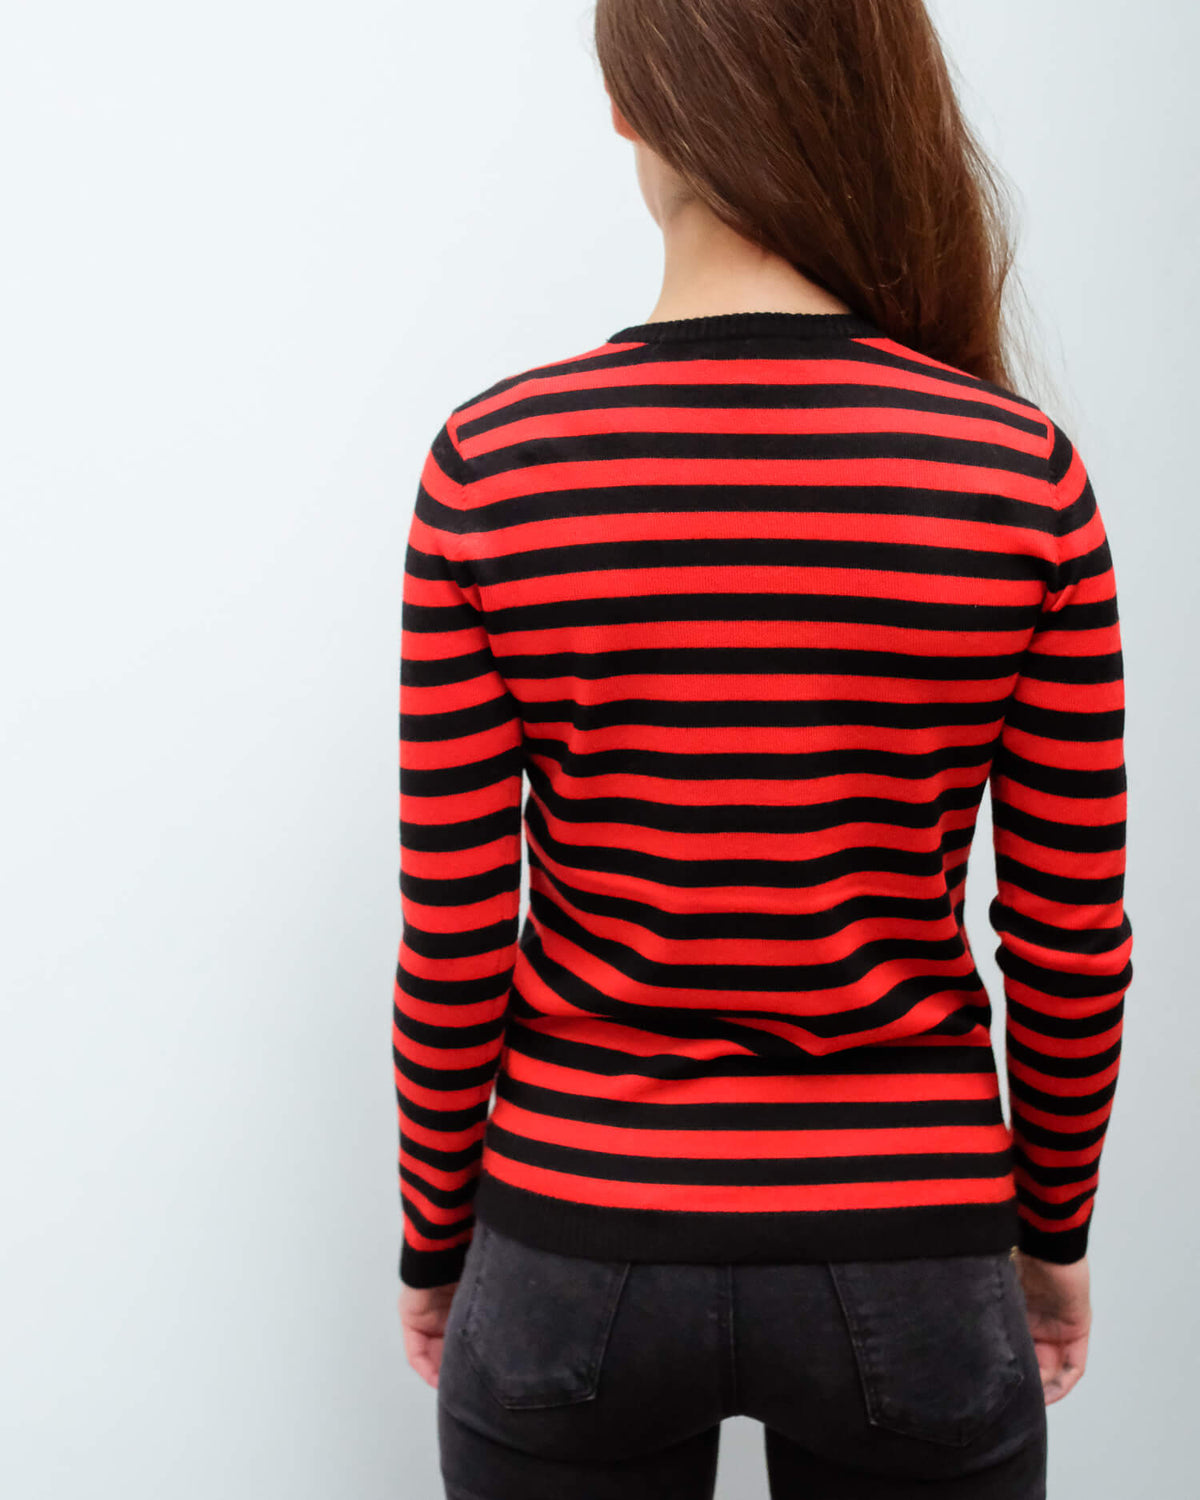 BF 1970 Striped jumper in red